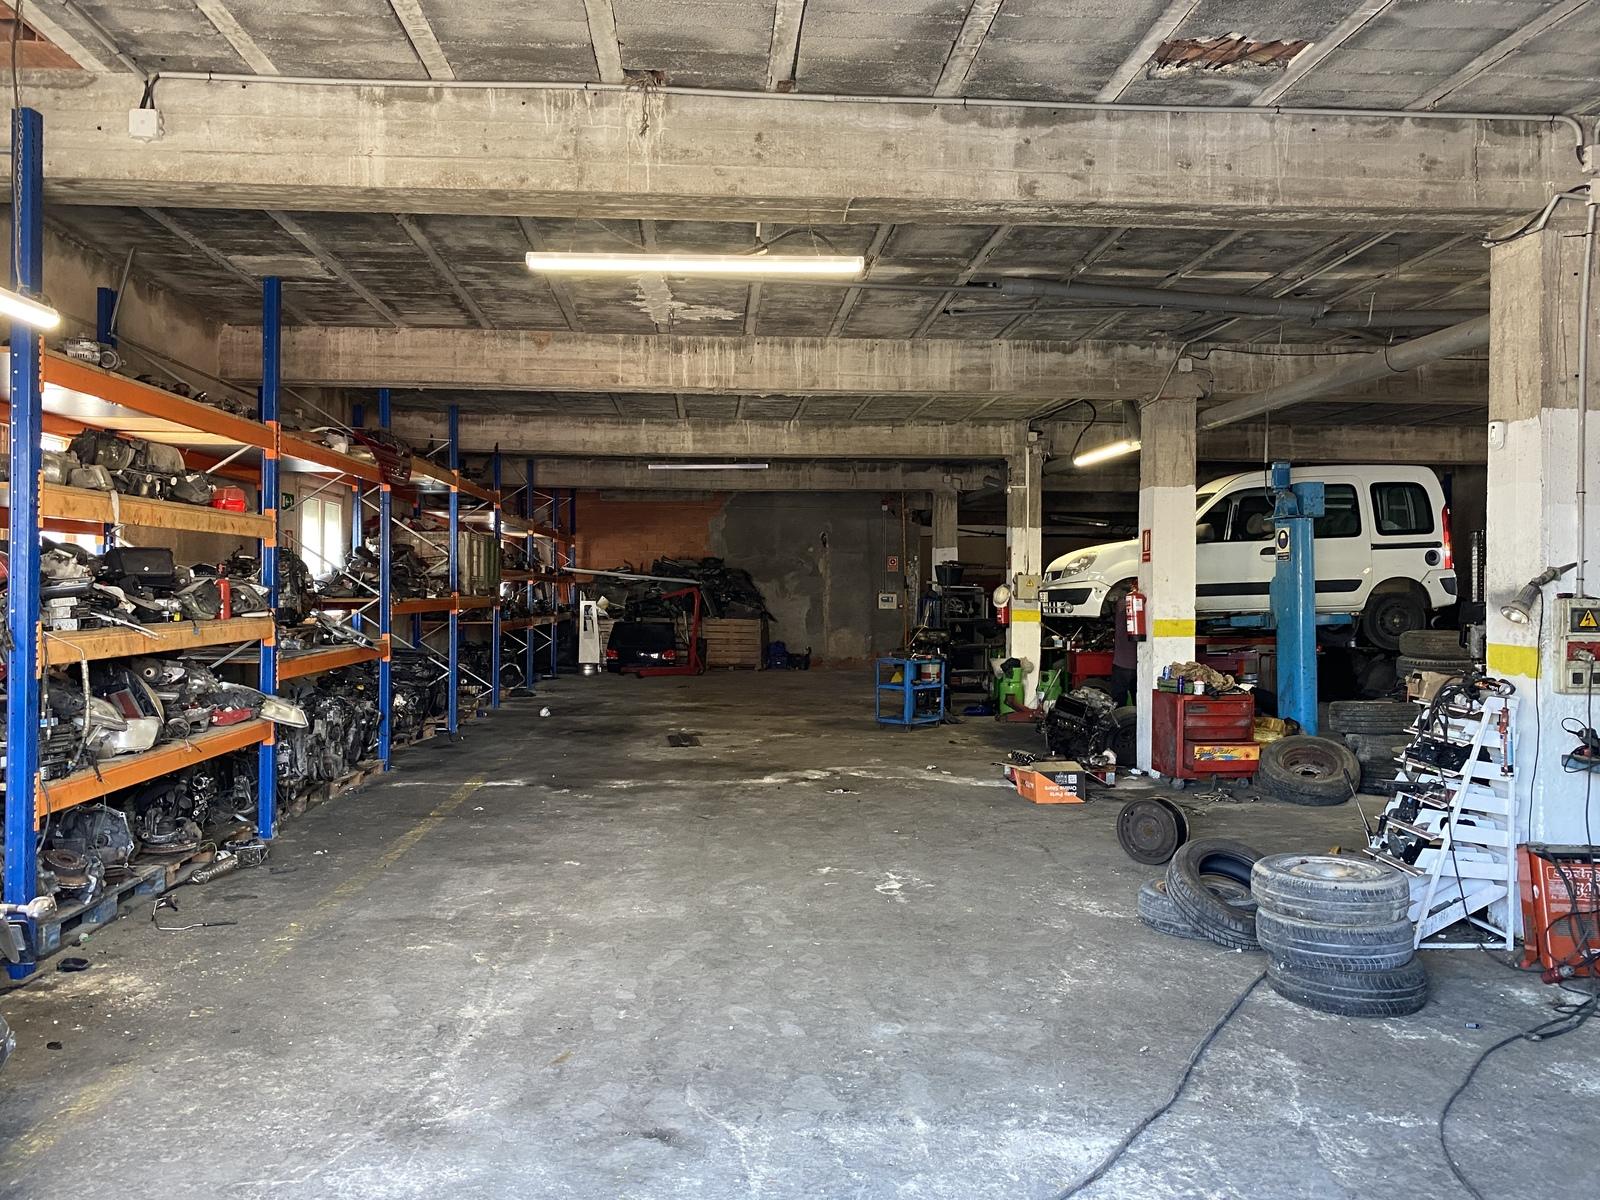 Business opportunity! Authorised Vehicle Treatment/Scrapyard Centre